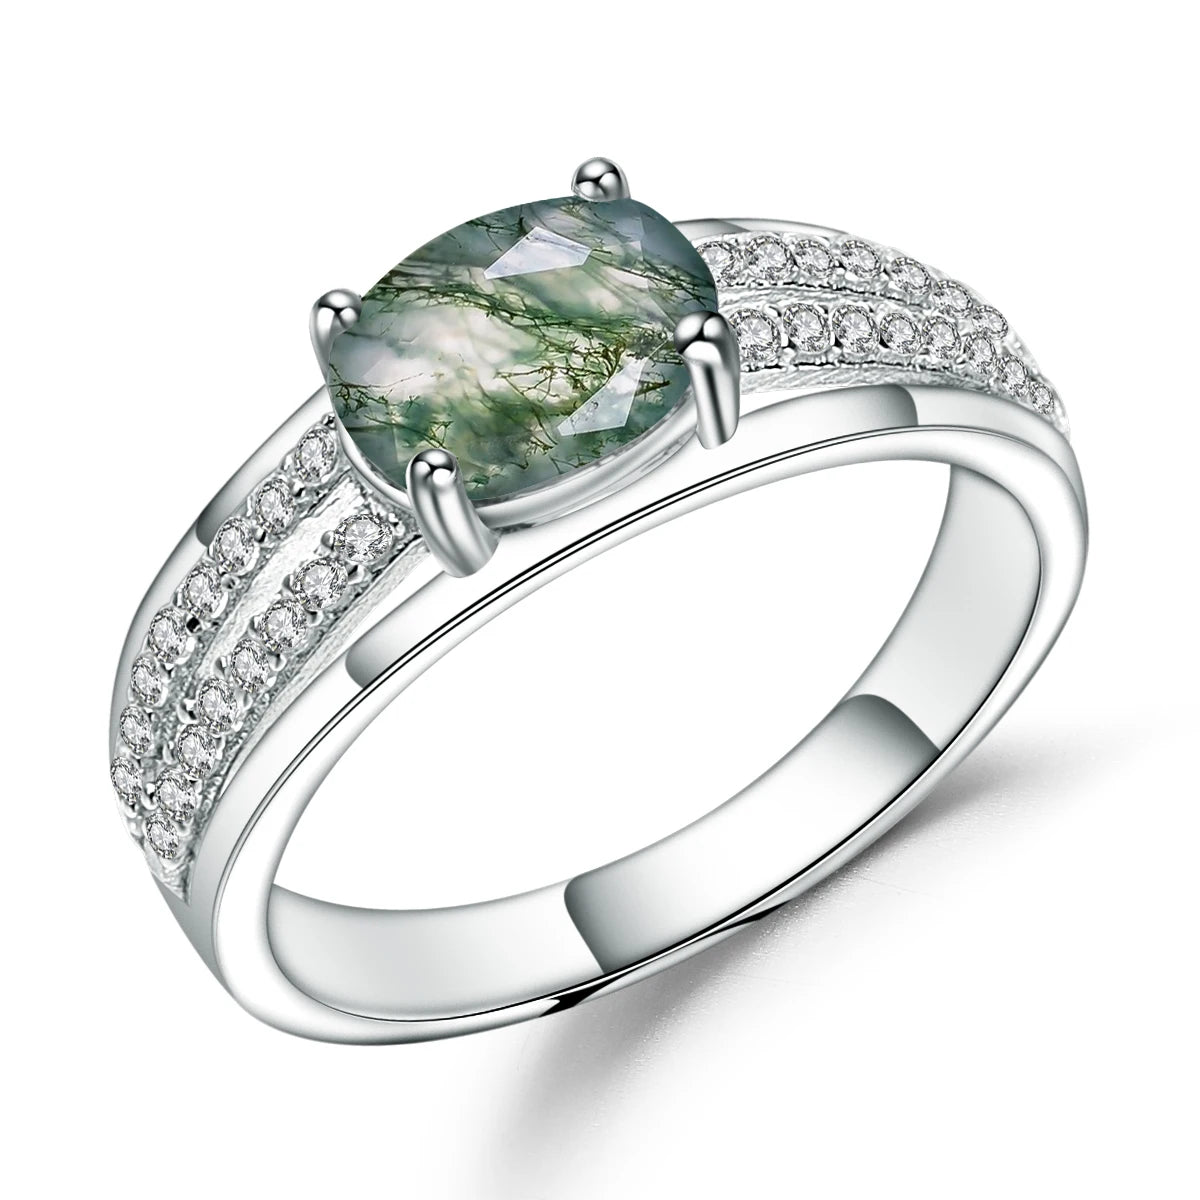 GEM'S BALLET Dainty 1.3Ct 6x8mm Natural Moss Agate Gemstone Ring in 925 Sterling Silver Wedding Engagement Ring Gift For Her 925 Sterling Silver Moss Agate